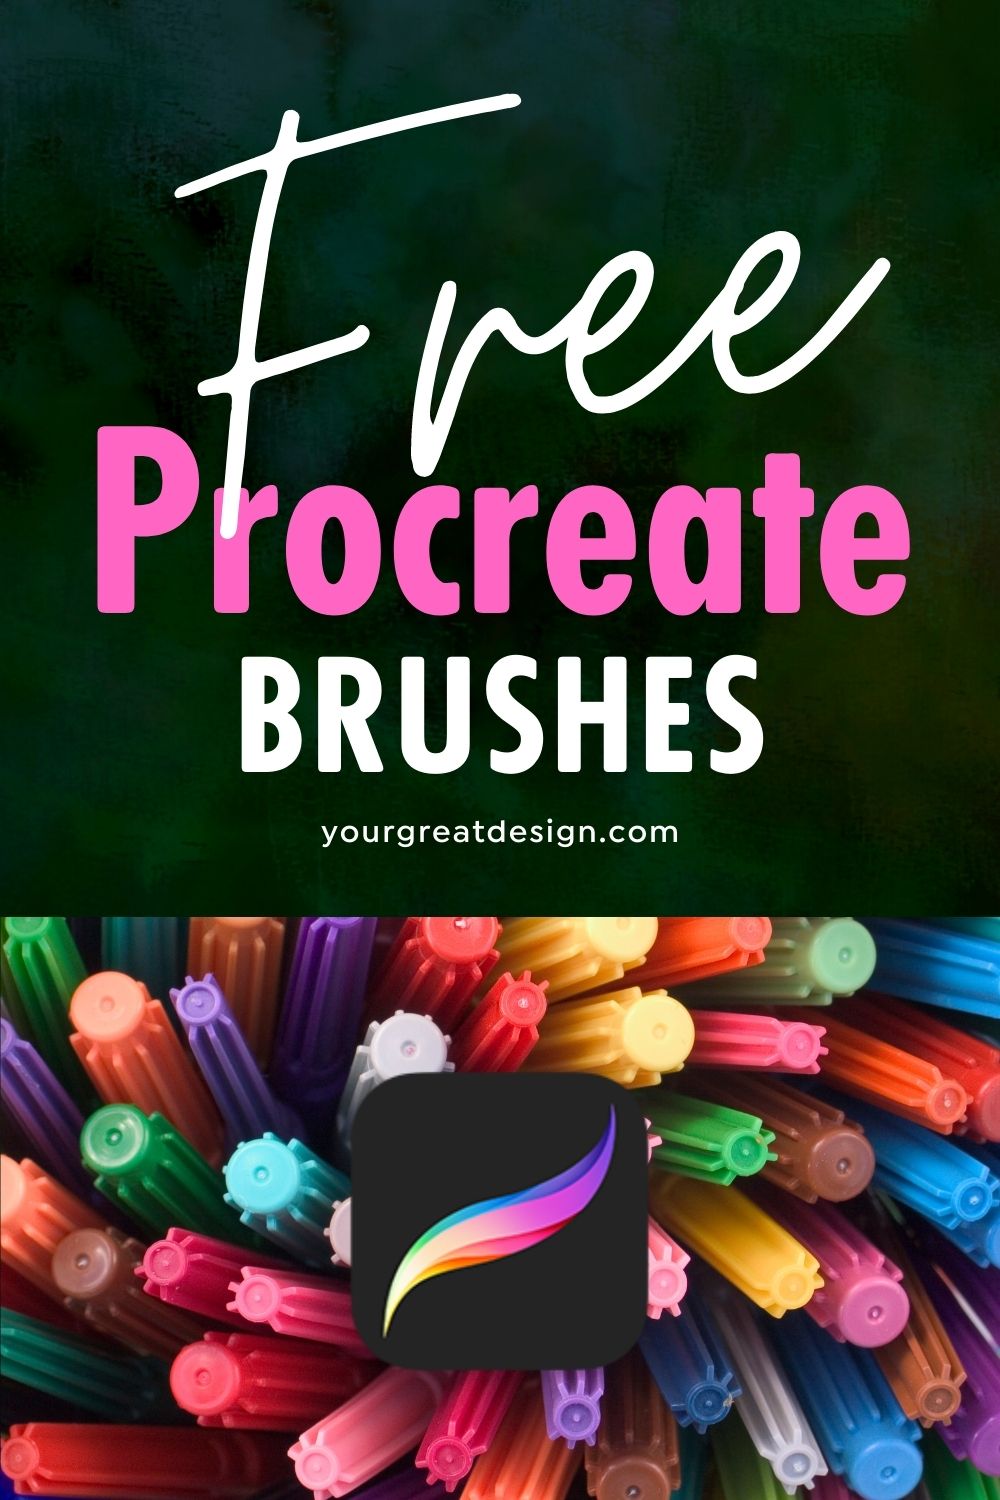 procreate brushes free download